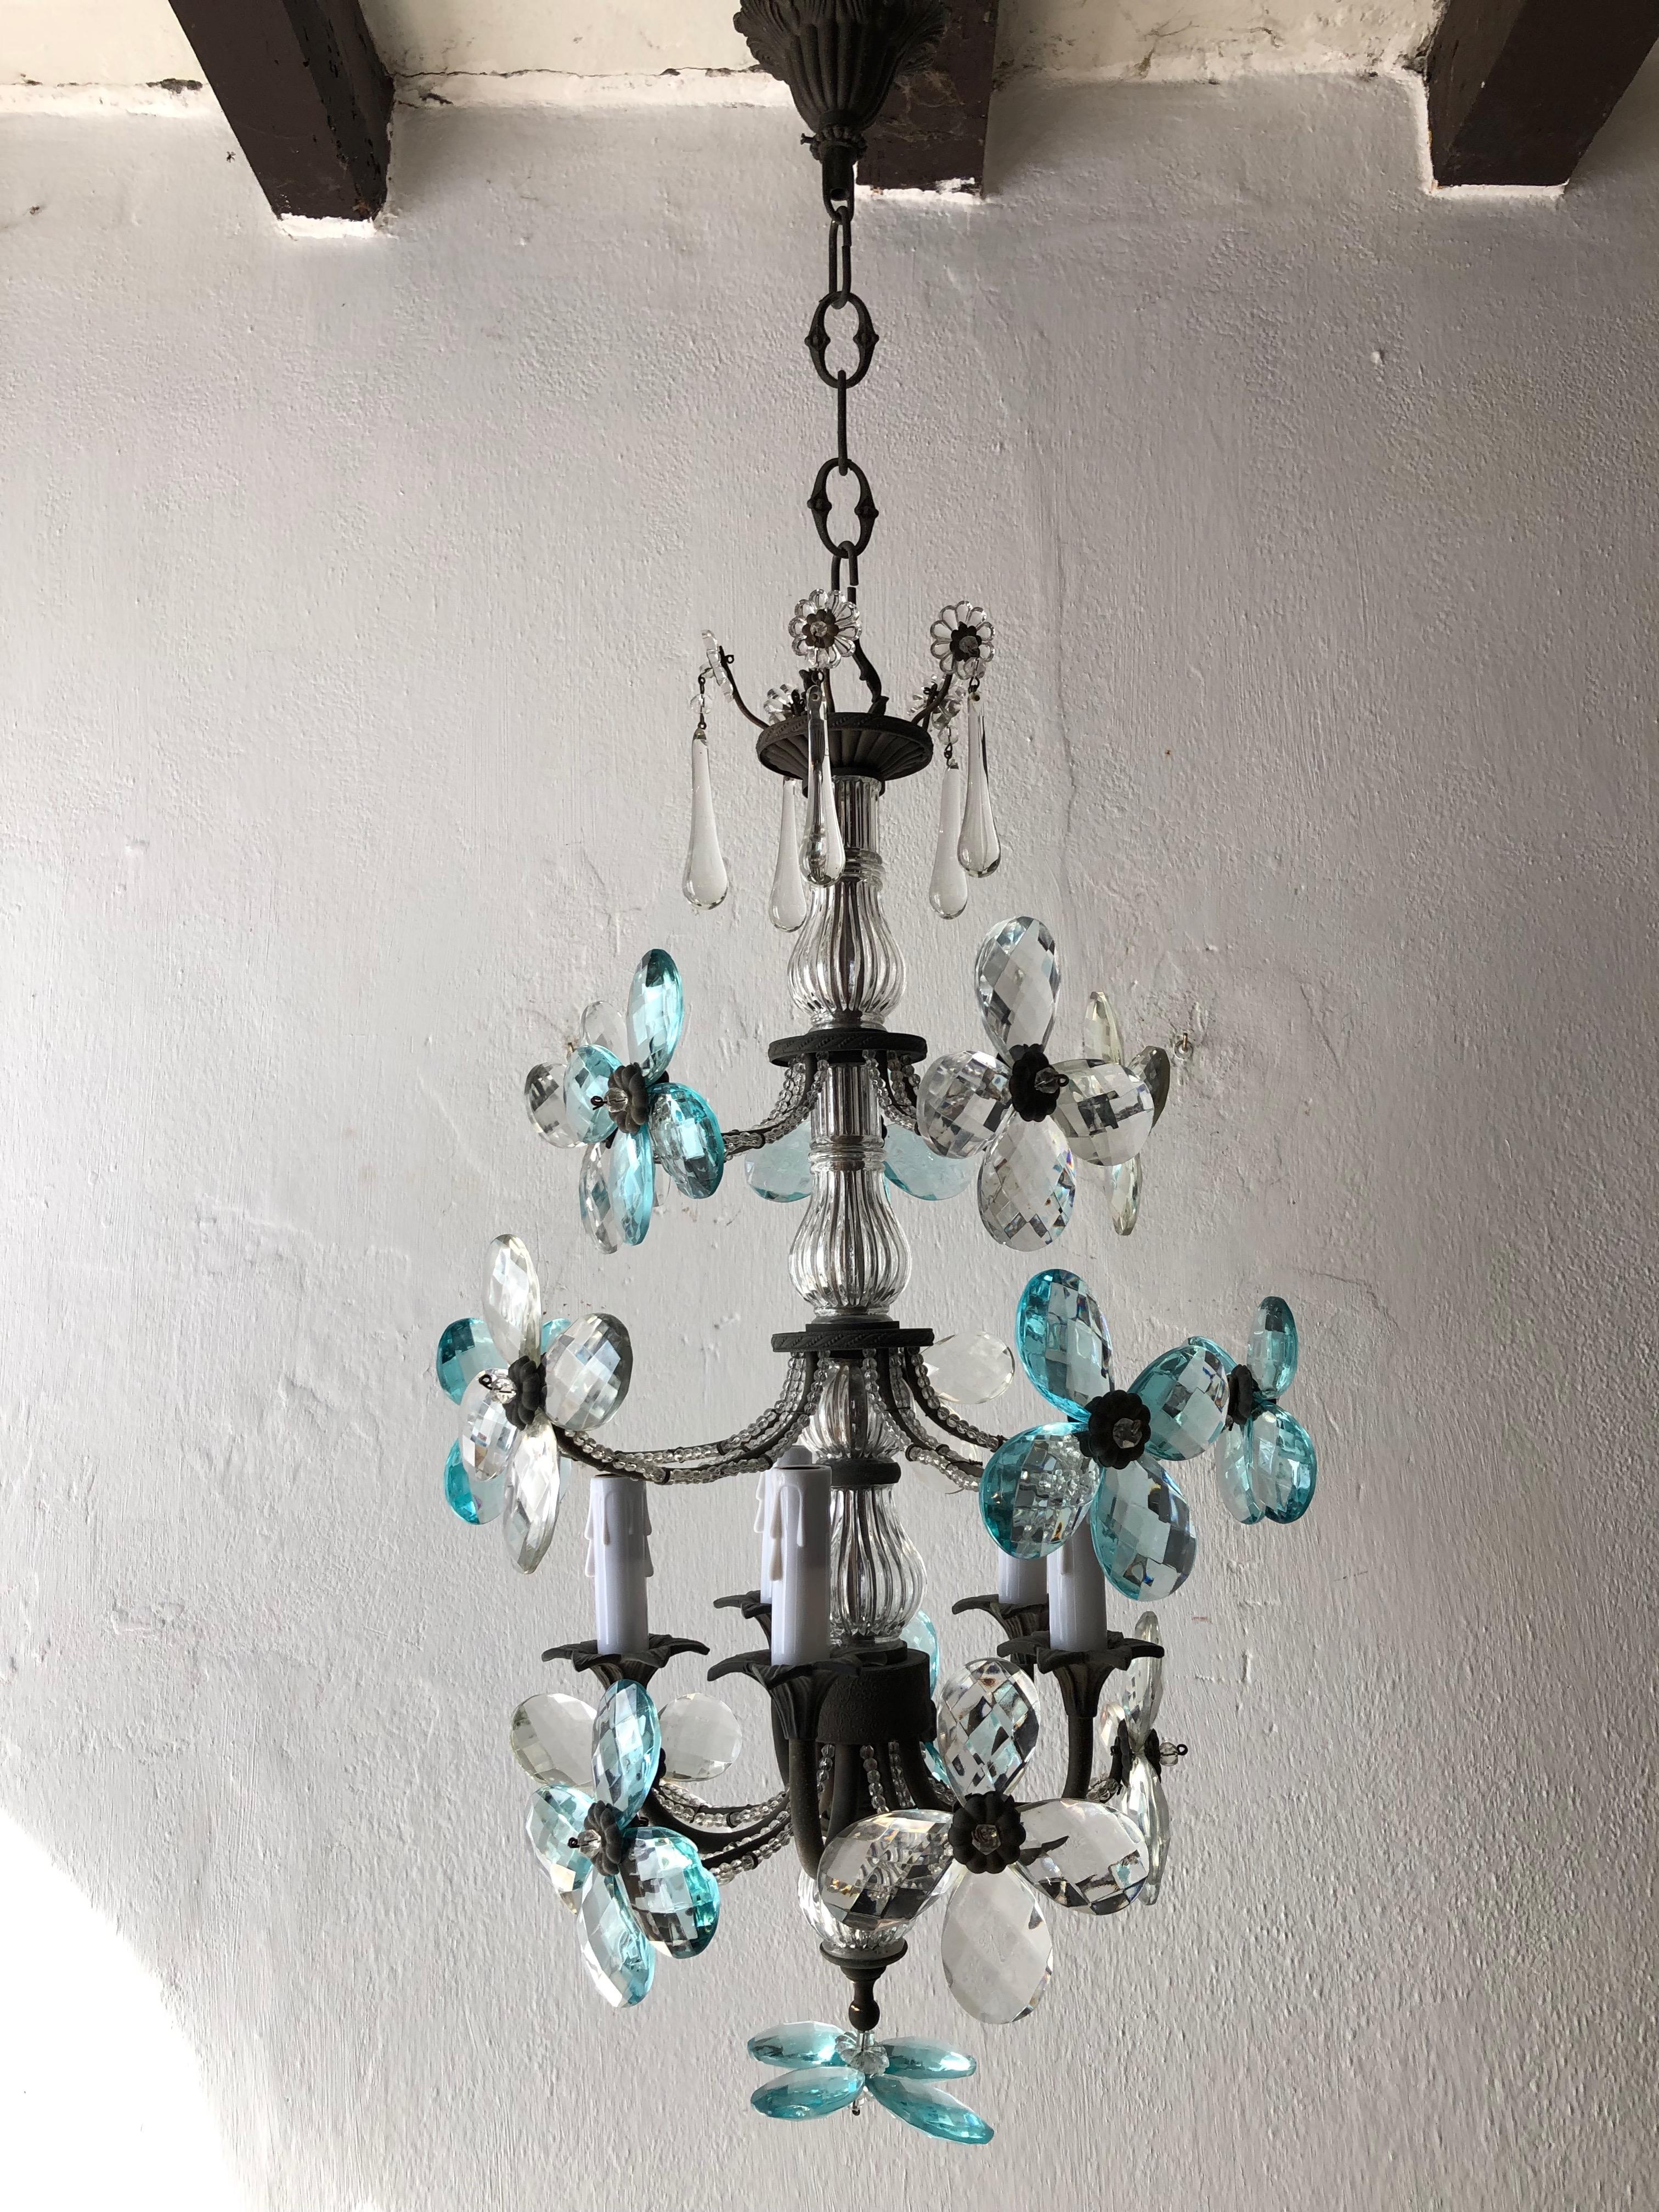 Housing 5 lights, rewired and ready to hang. Three tiers of beaded arms with alternating aqua and clear flowers. Murano dips hanging from top. Adding another 13 inches of original chain and canopy. Free priority shipping from Italy.